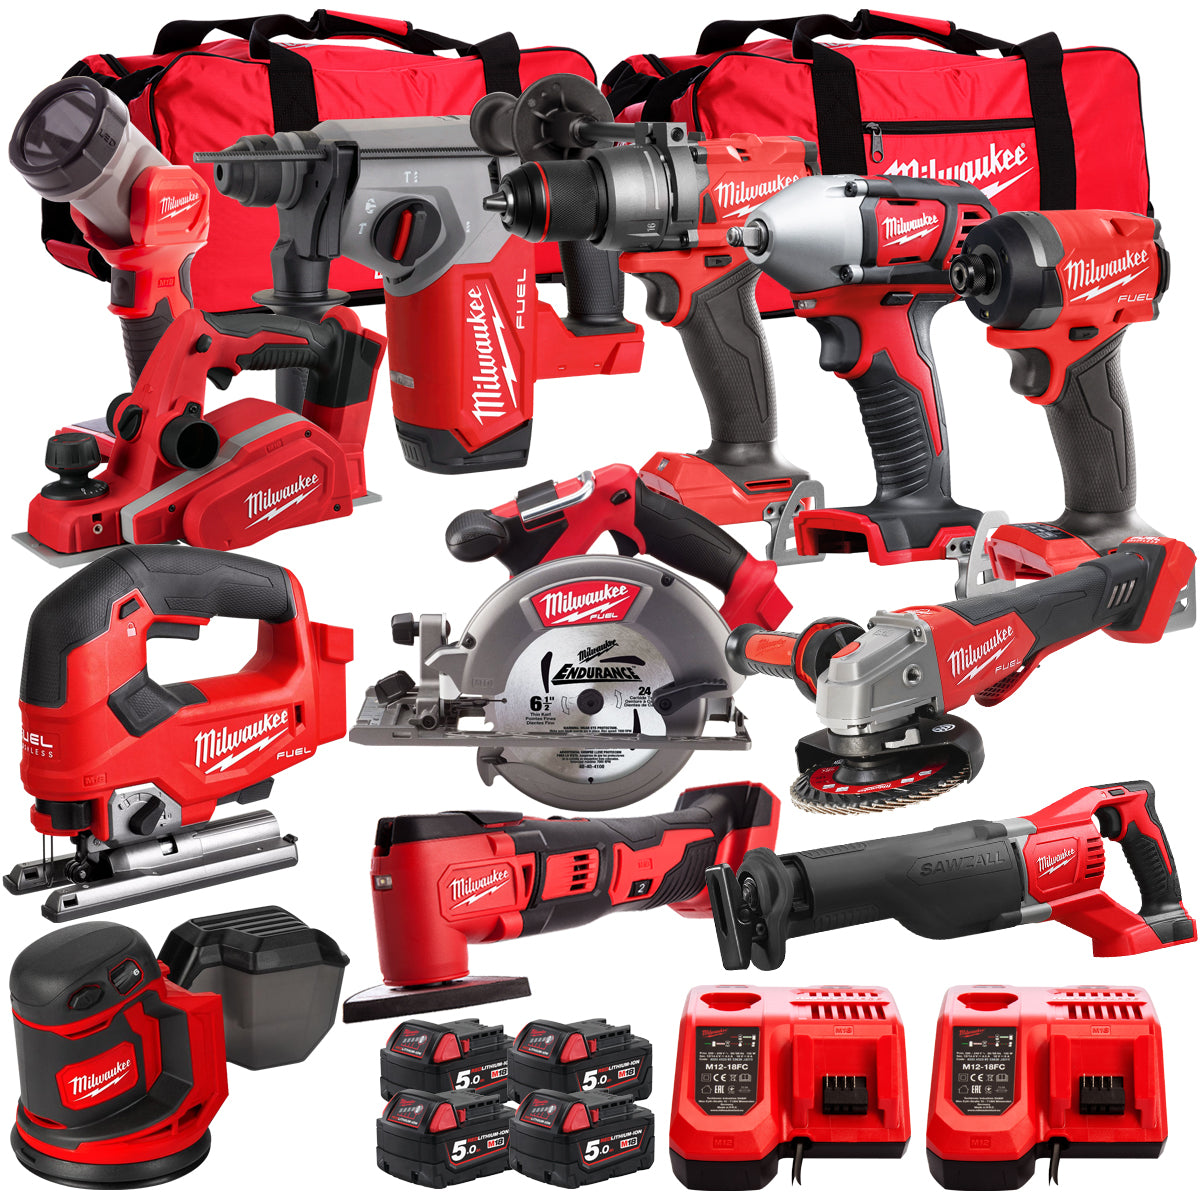 Milwaukee 18V Cordless 12 Piece Tool Kit with 4 x 5.0Ah Batteries & Charger in Bag T4TKIT-13503